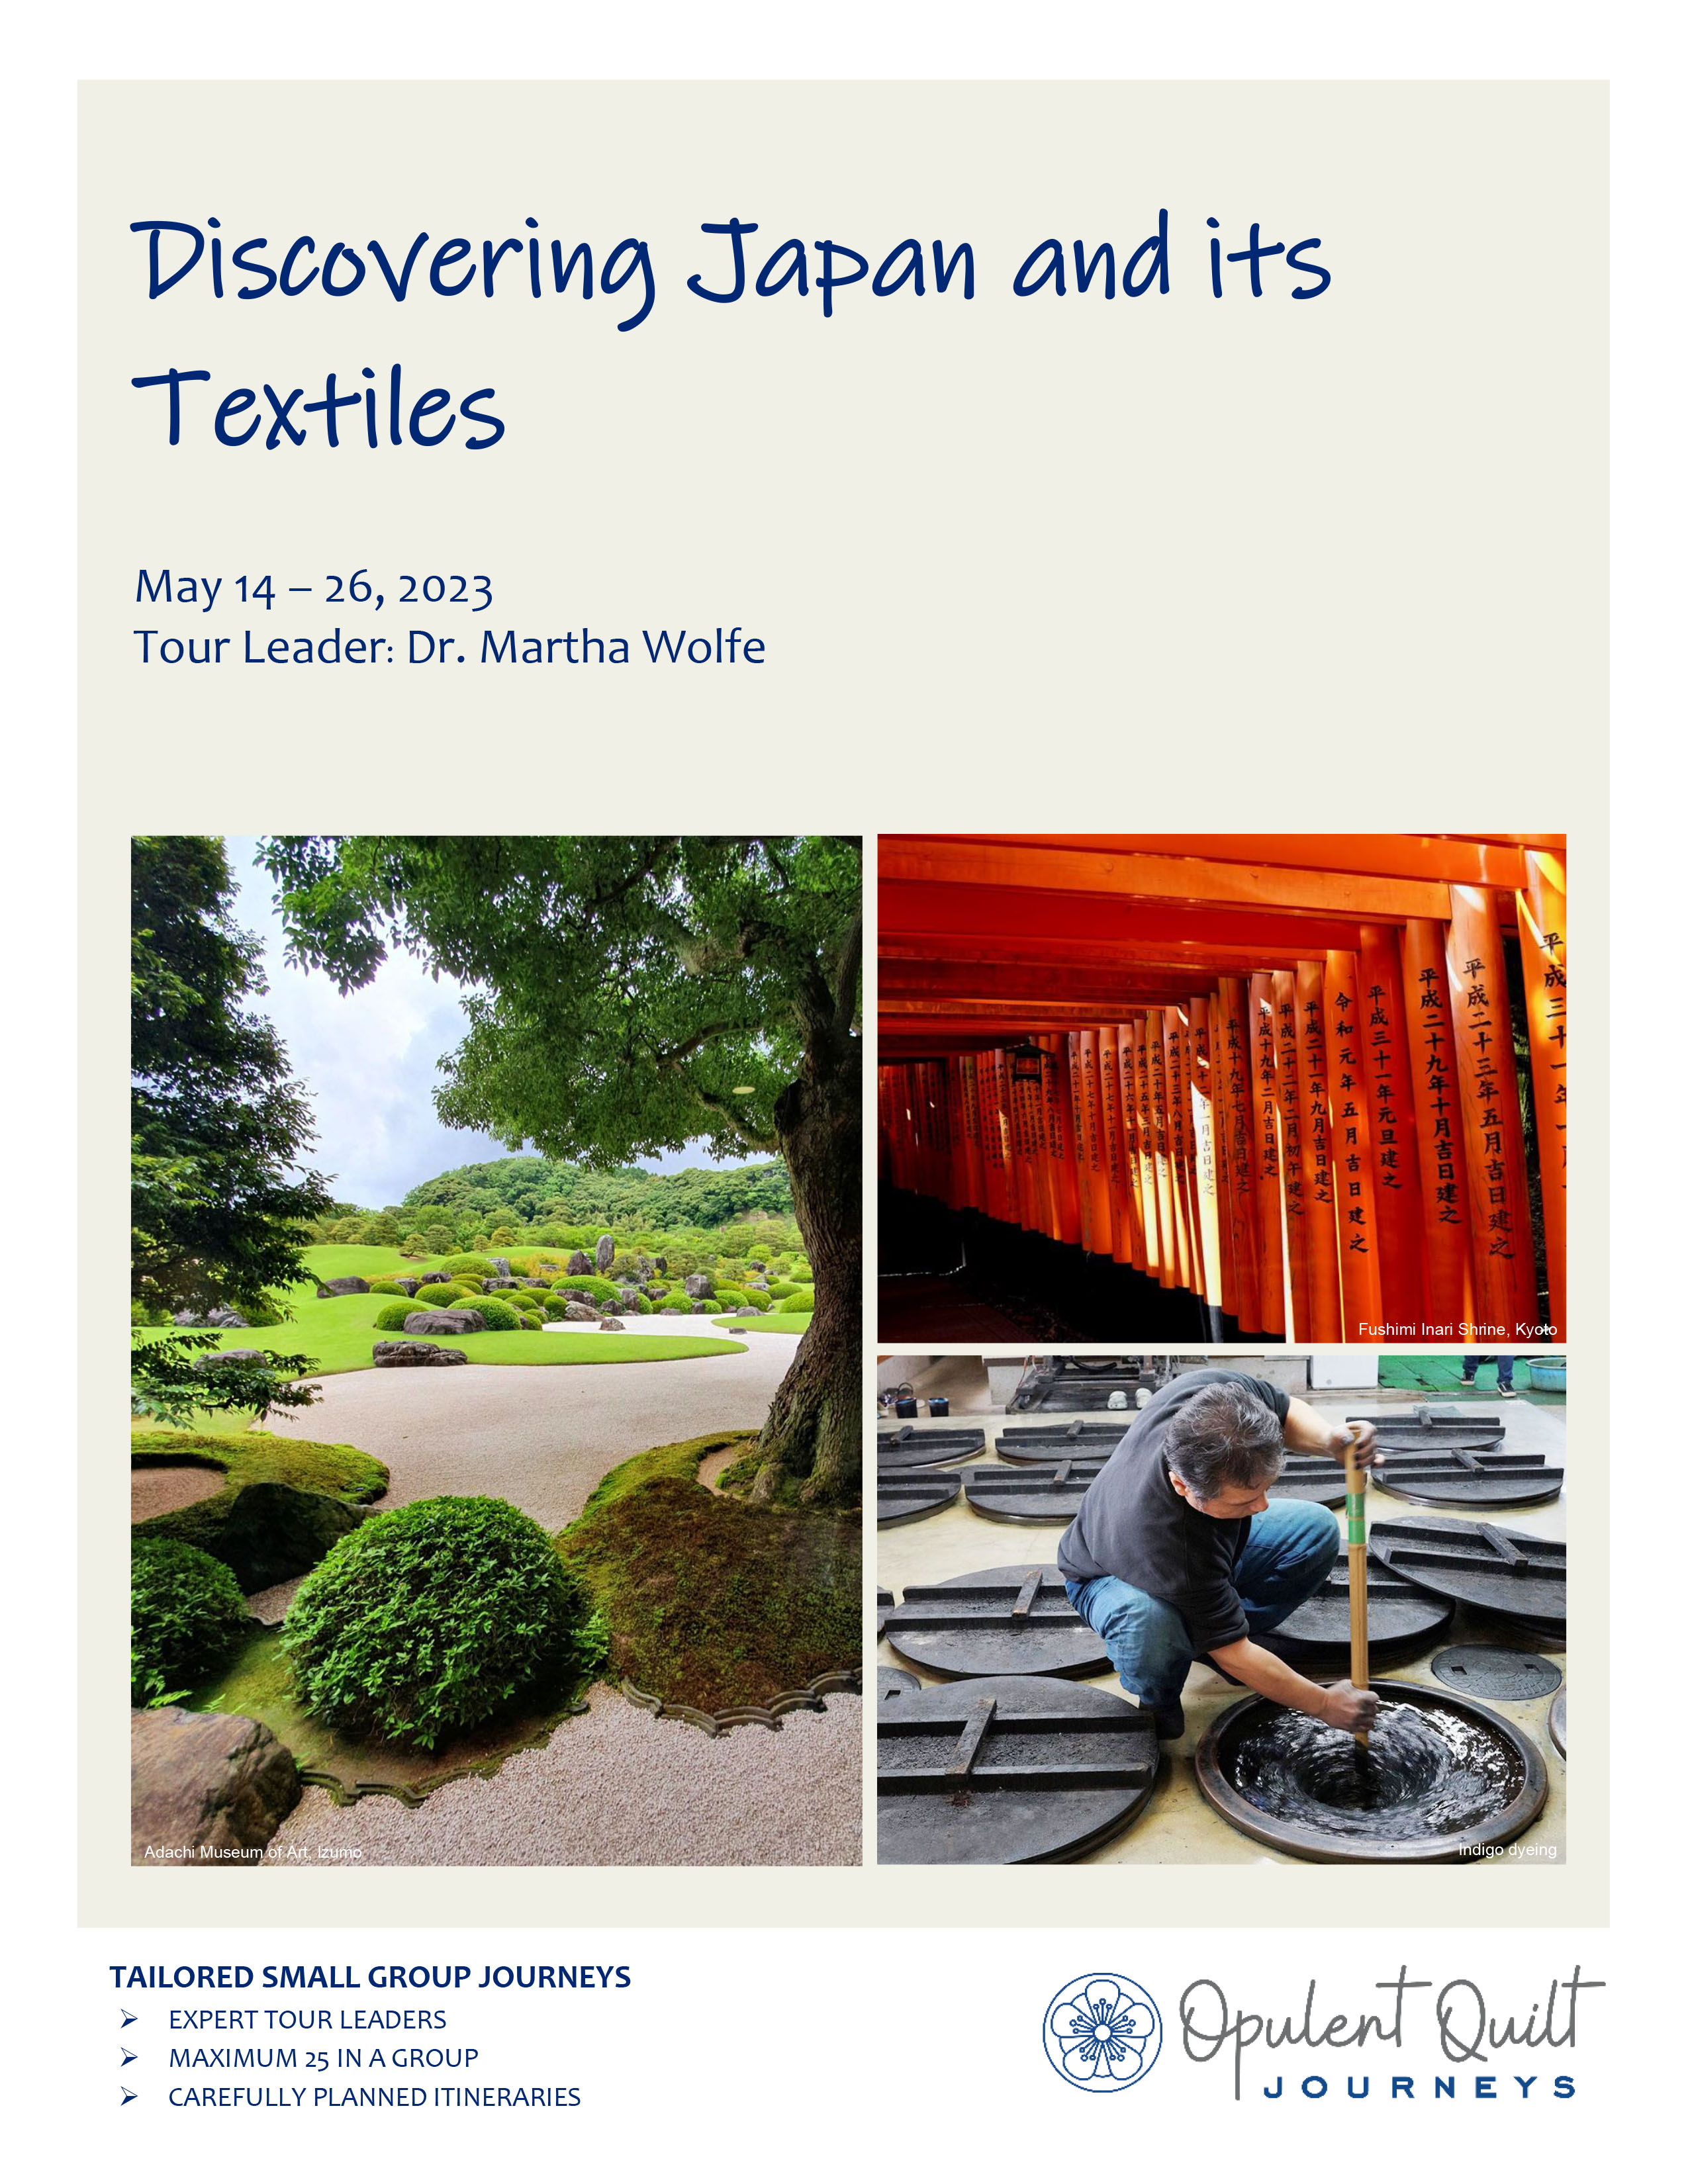 Discovering Japan and its Textile with Dr Martha Wolfe